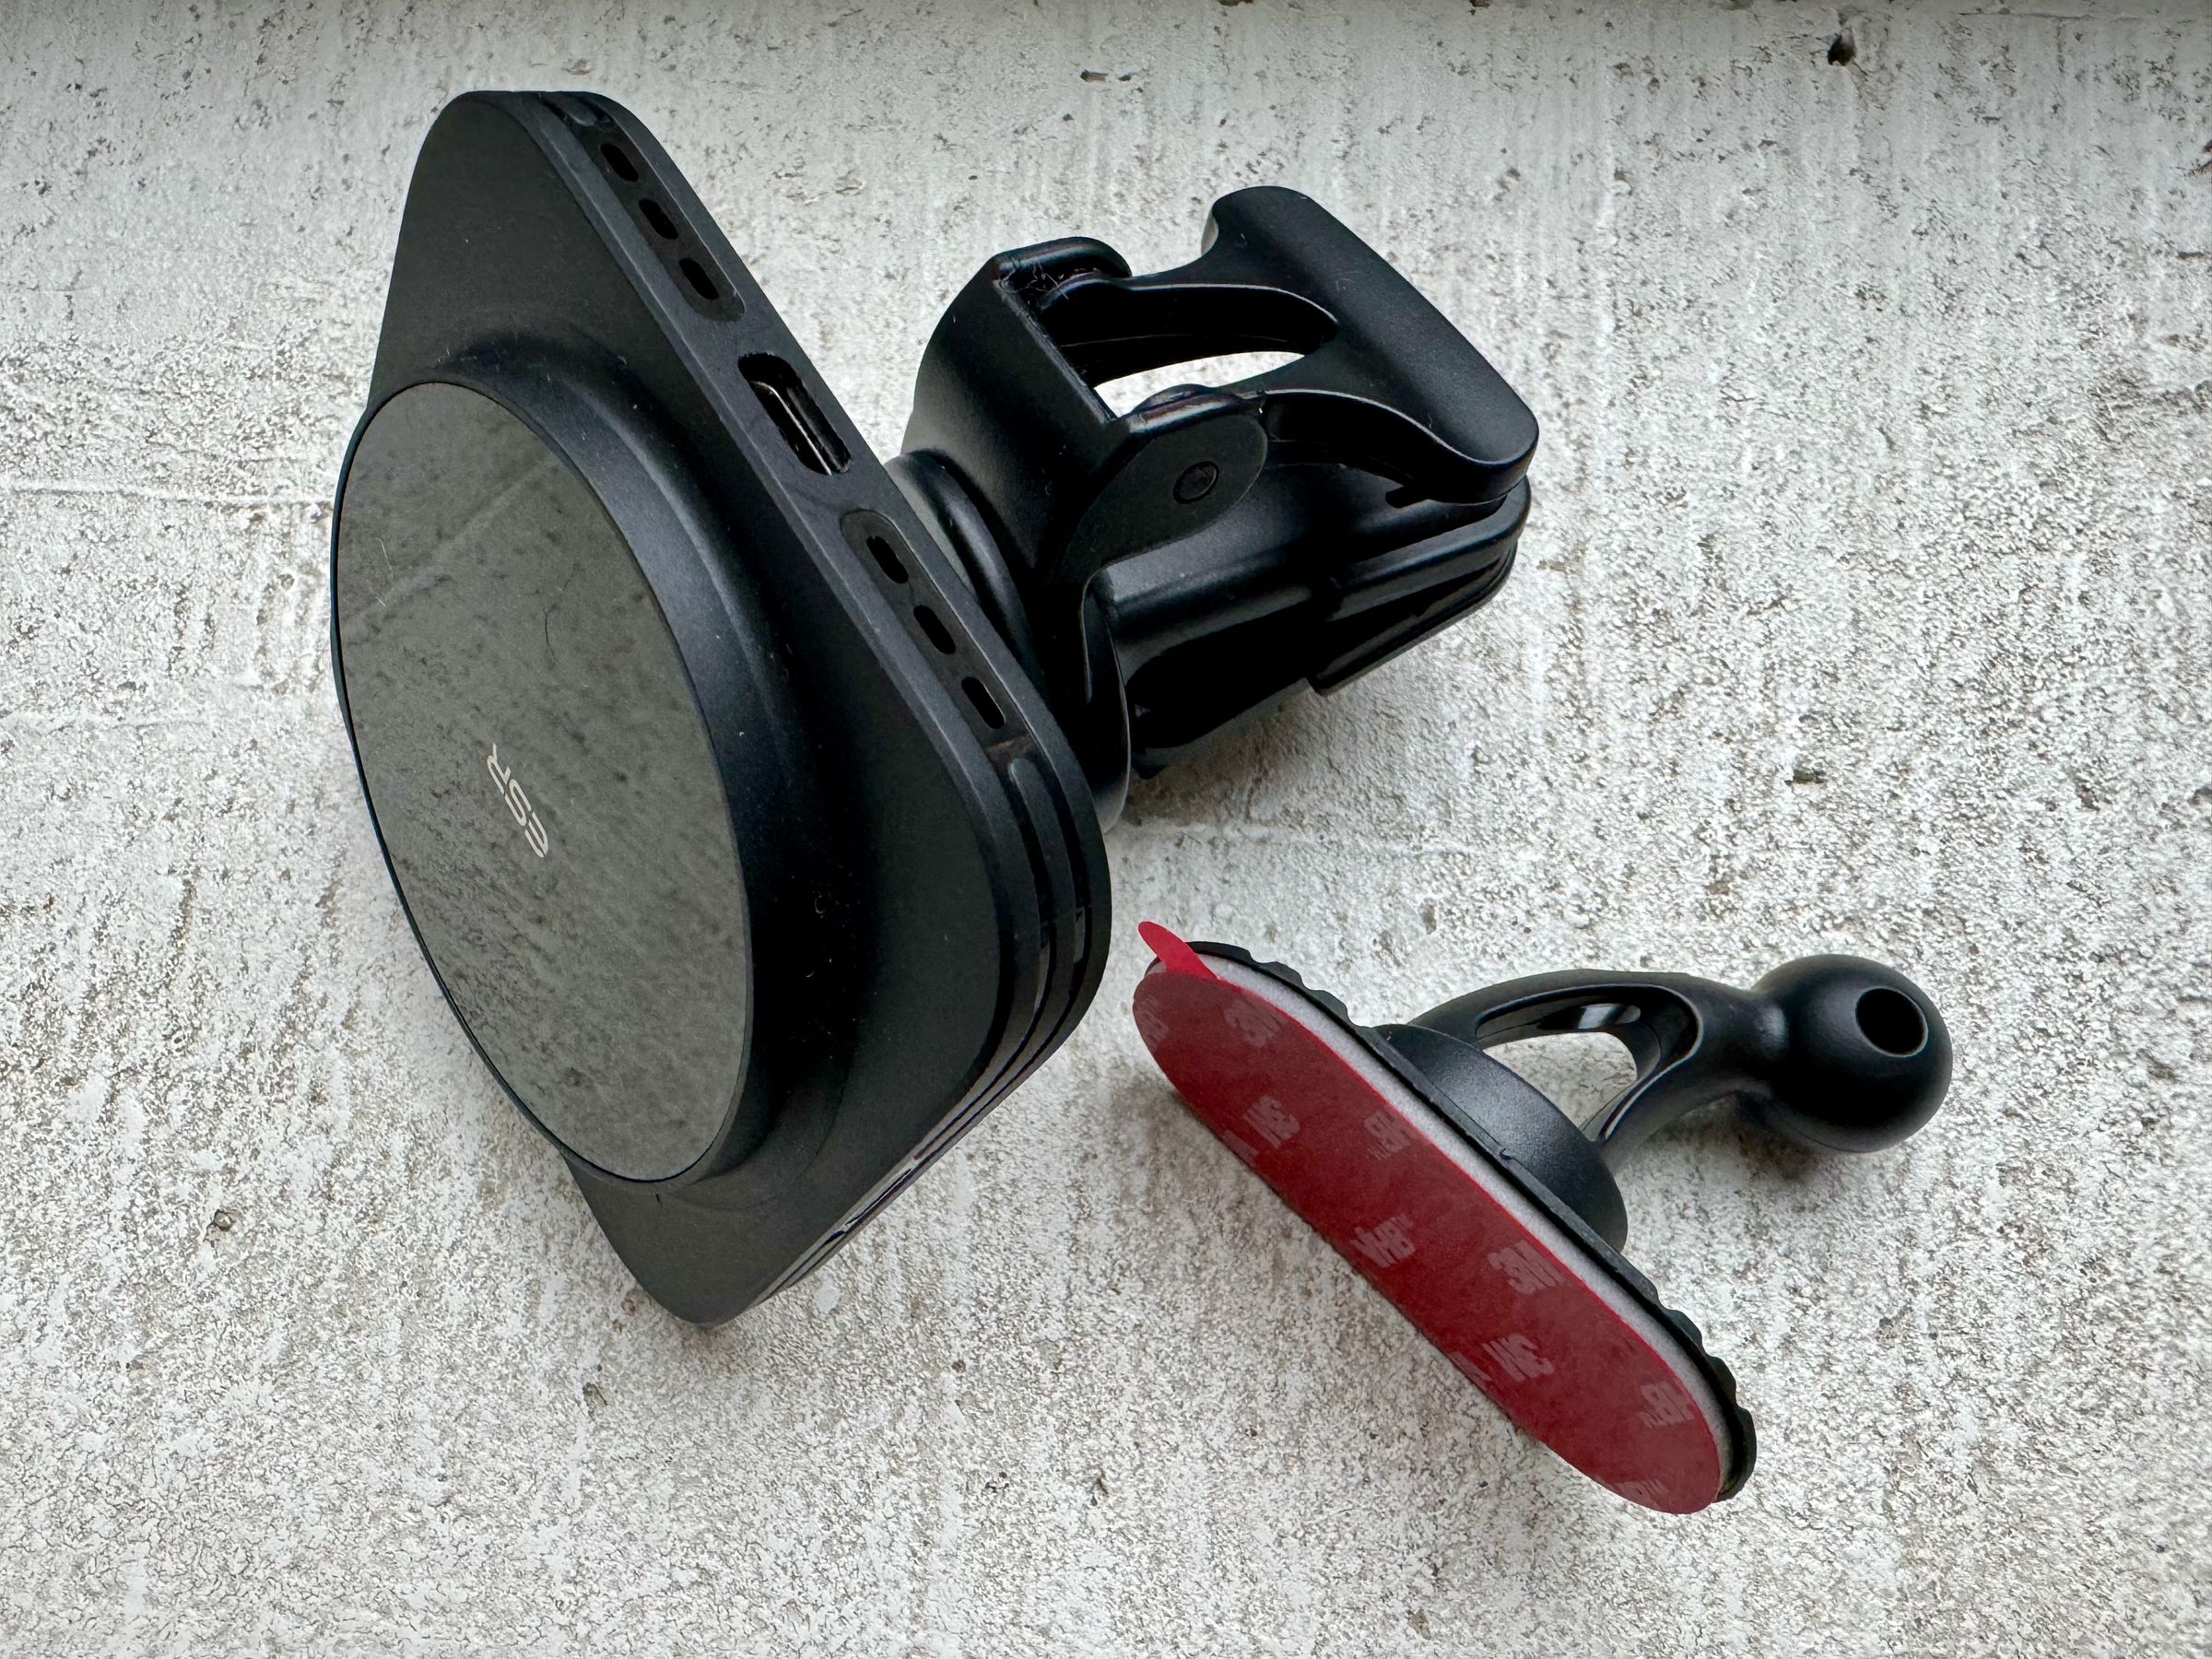 ESR includes two mounts in the box: the air vent clip (shown attached to the charging puck) and a flexible 3M adhesive mount that conforms to the shape of your dashboard.